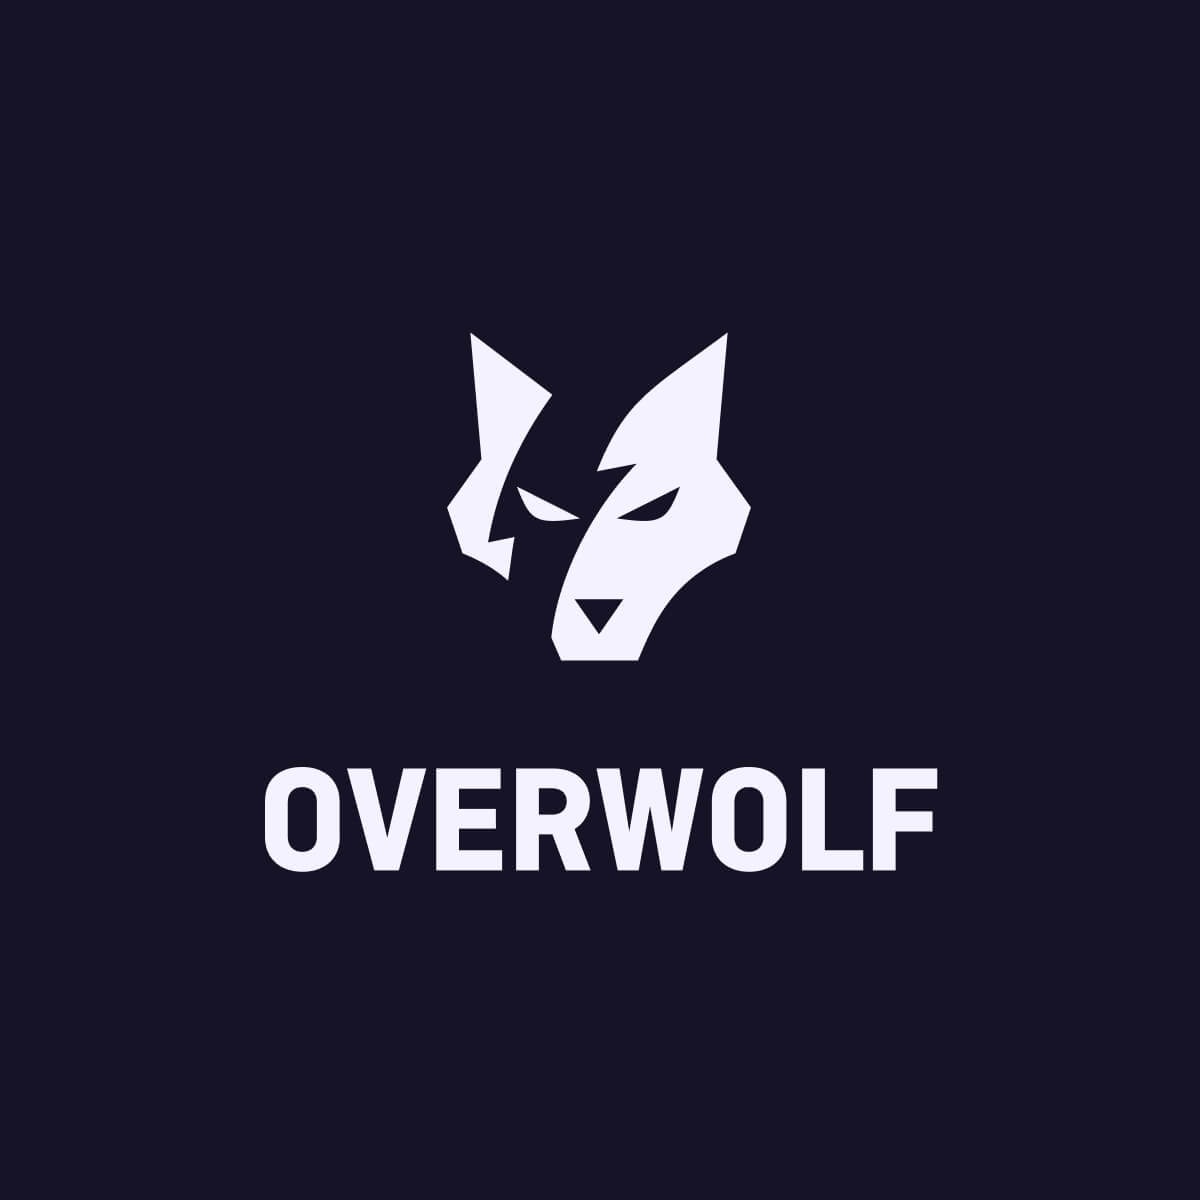 Overwolf Addon Management App Now Launching on Oct 20th - Wowhead News